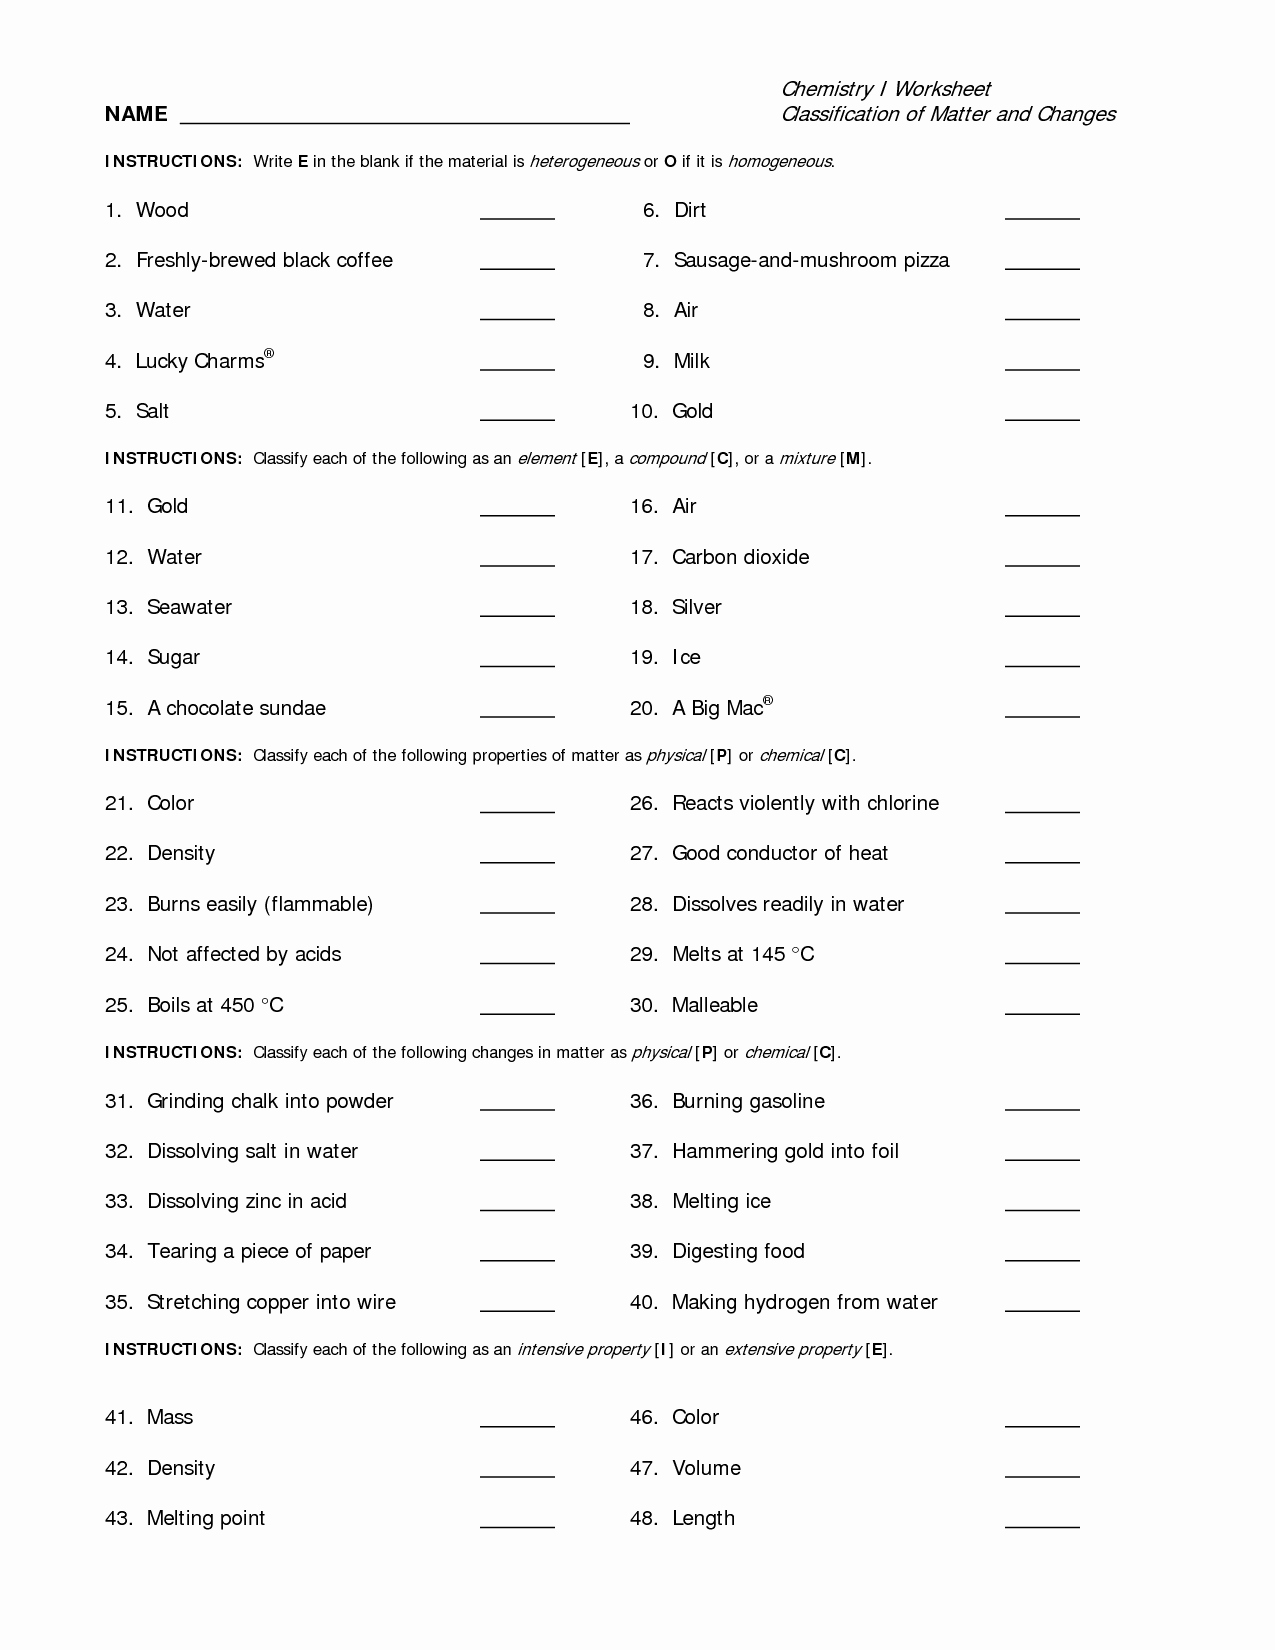 Composition Of Matter Worksheet Luxury 18 Best Of Classification Key Worksheet Answer